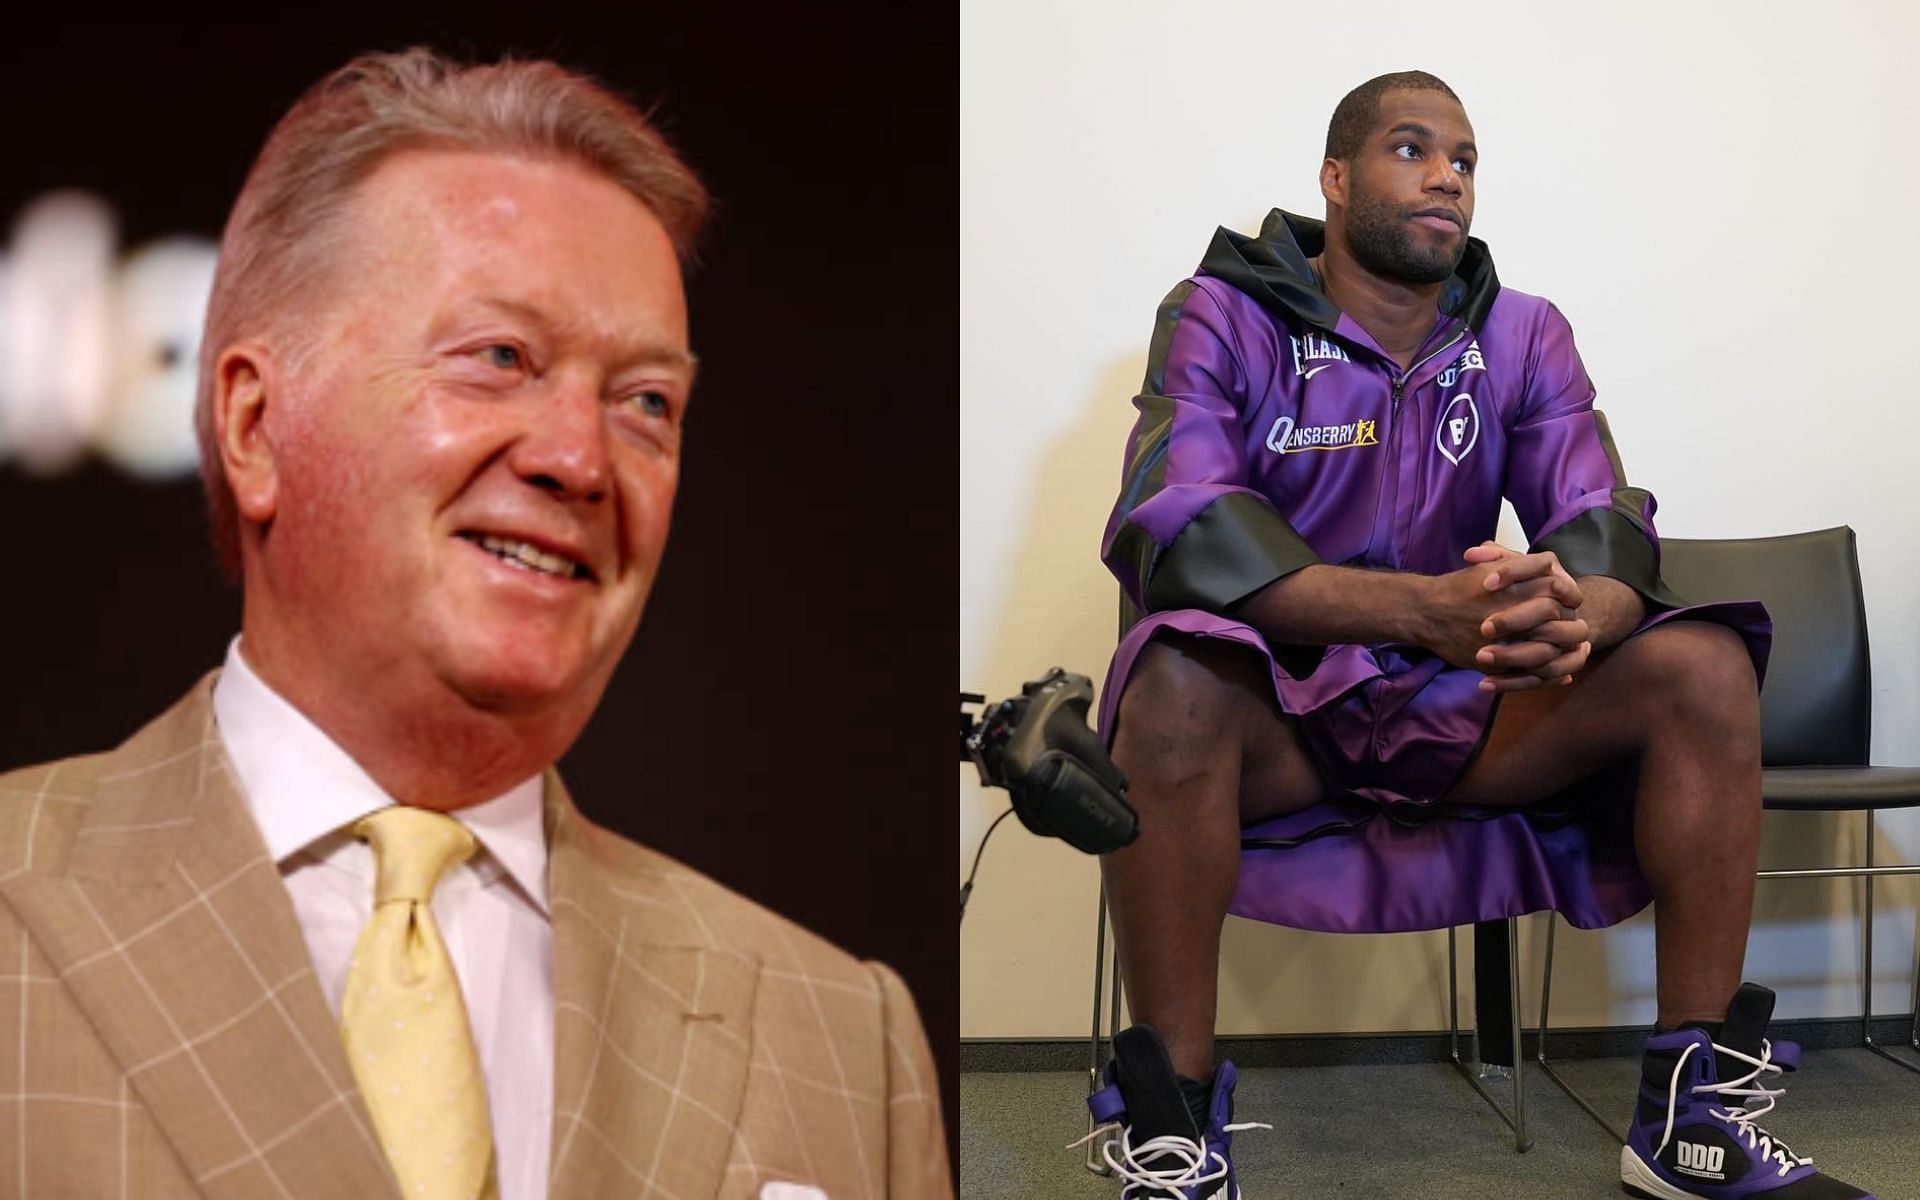 Frank Warren (left) planning a huge next fight for Daniel Dubois (right) [Photo Courtesy of Getty Images and @dynamite_daniel_dubois on Instagram]